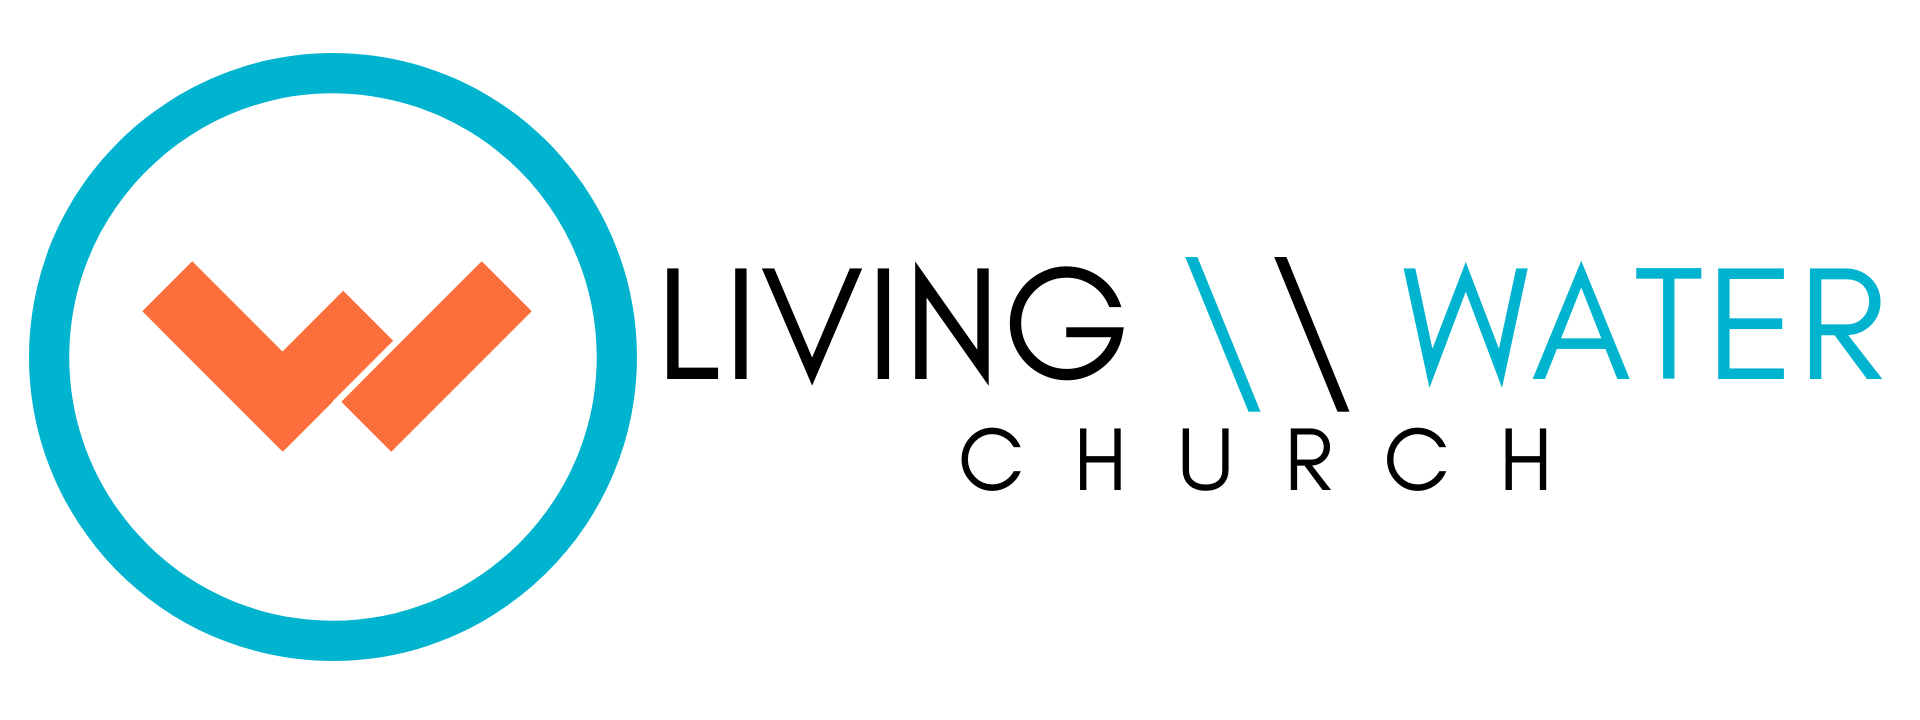 What We Do Church Of Living Water